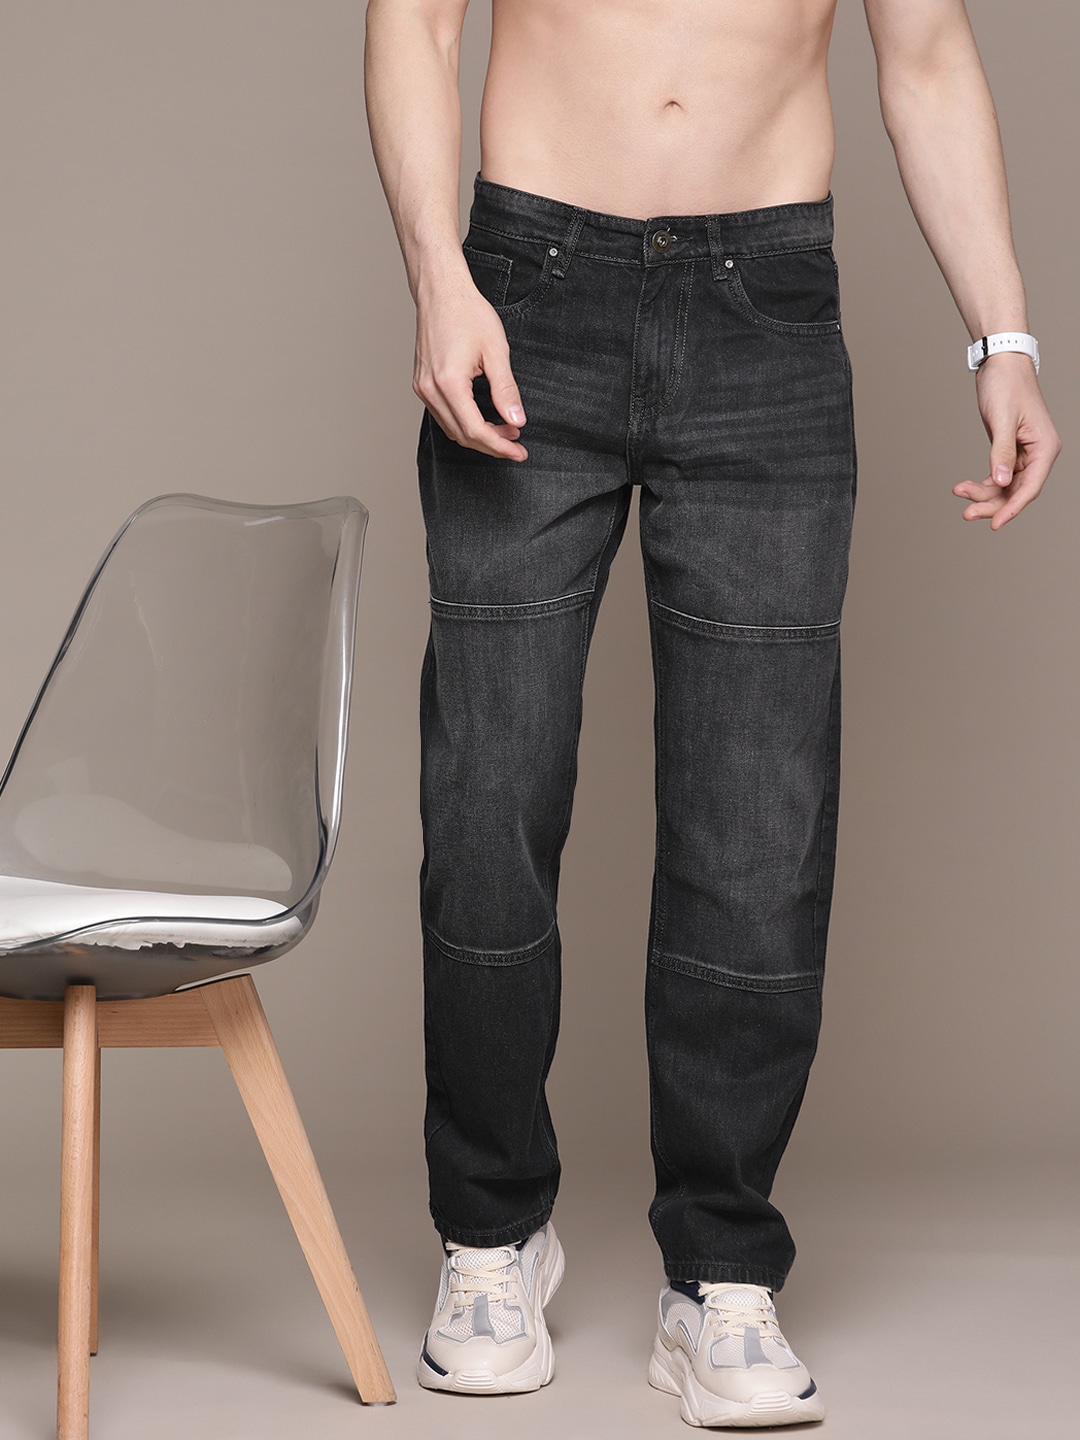 Roadster Men Relaxed Fit Light Fade Pure Cotton Jeans